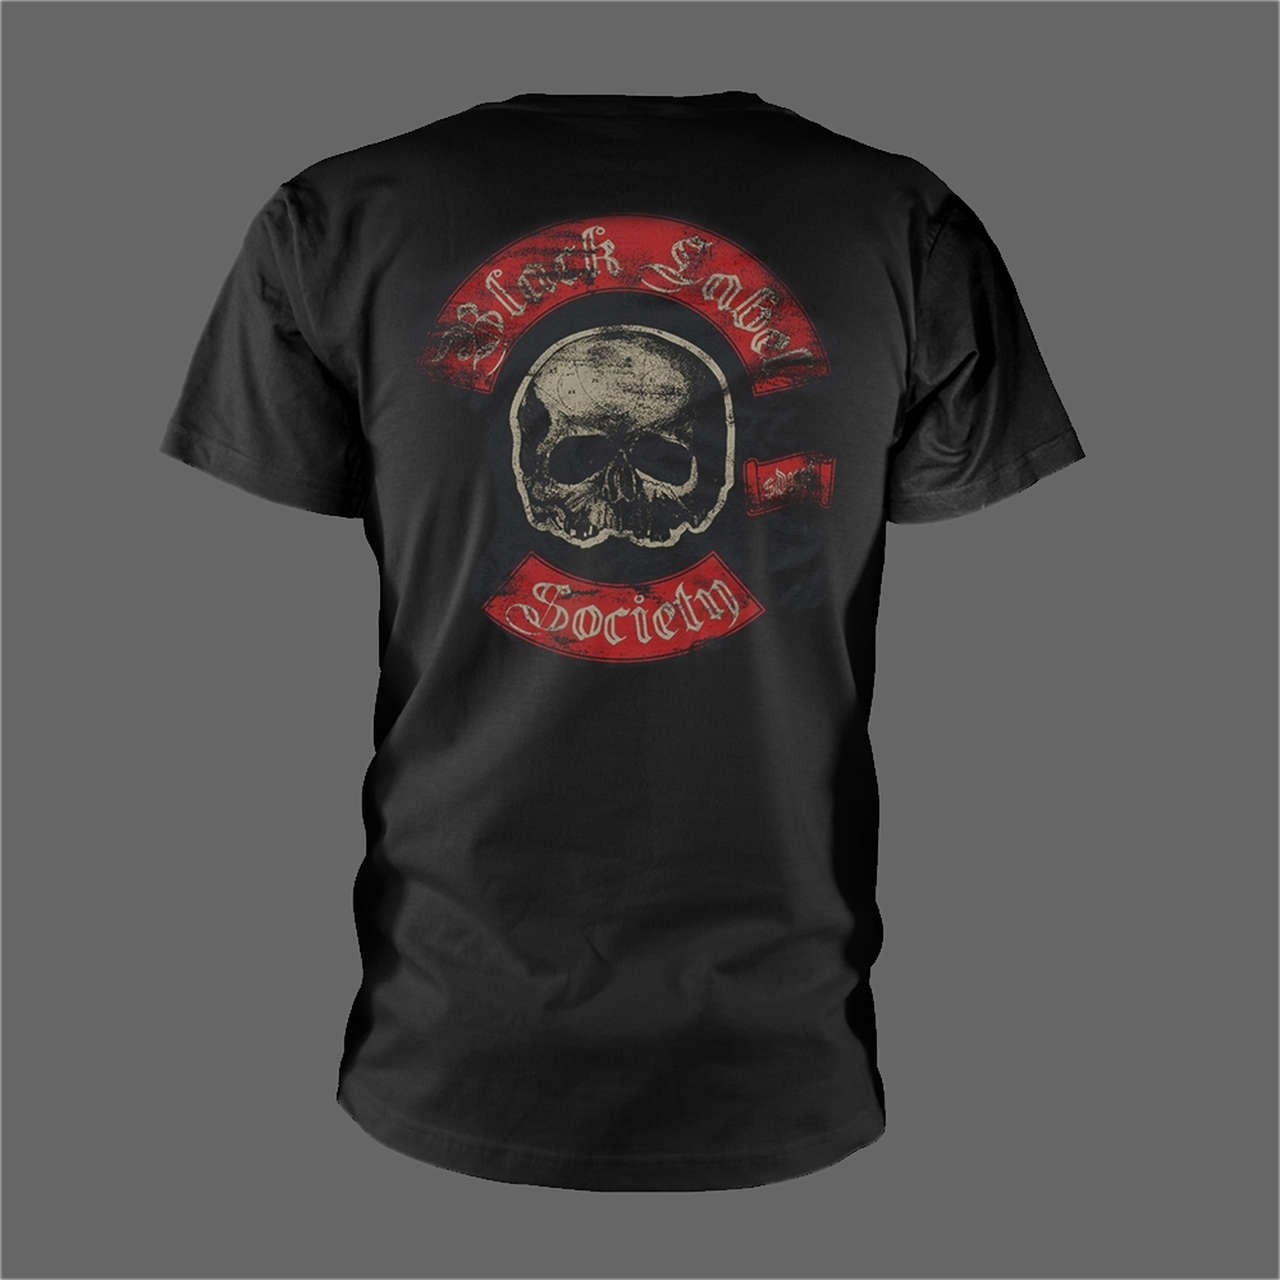 Black Label Society - Destroy & Conquer (T-Shirt)